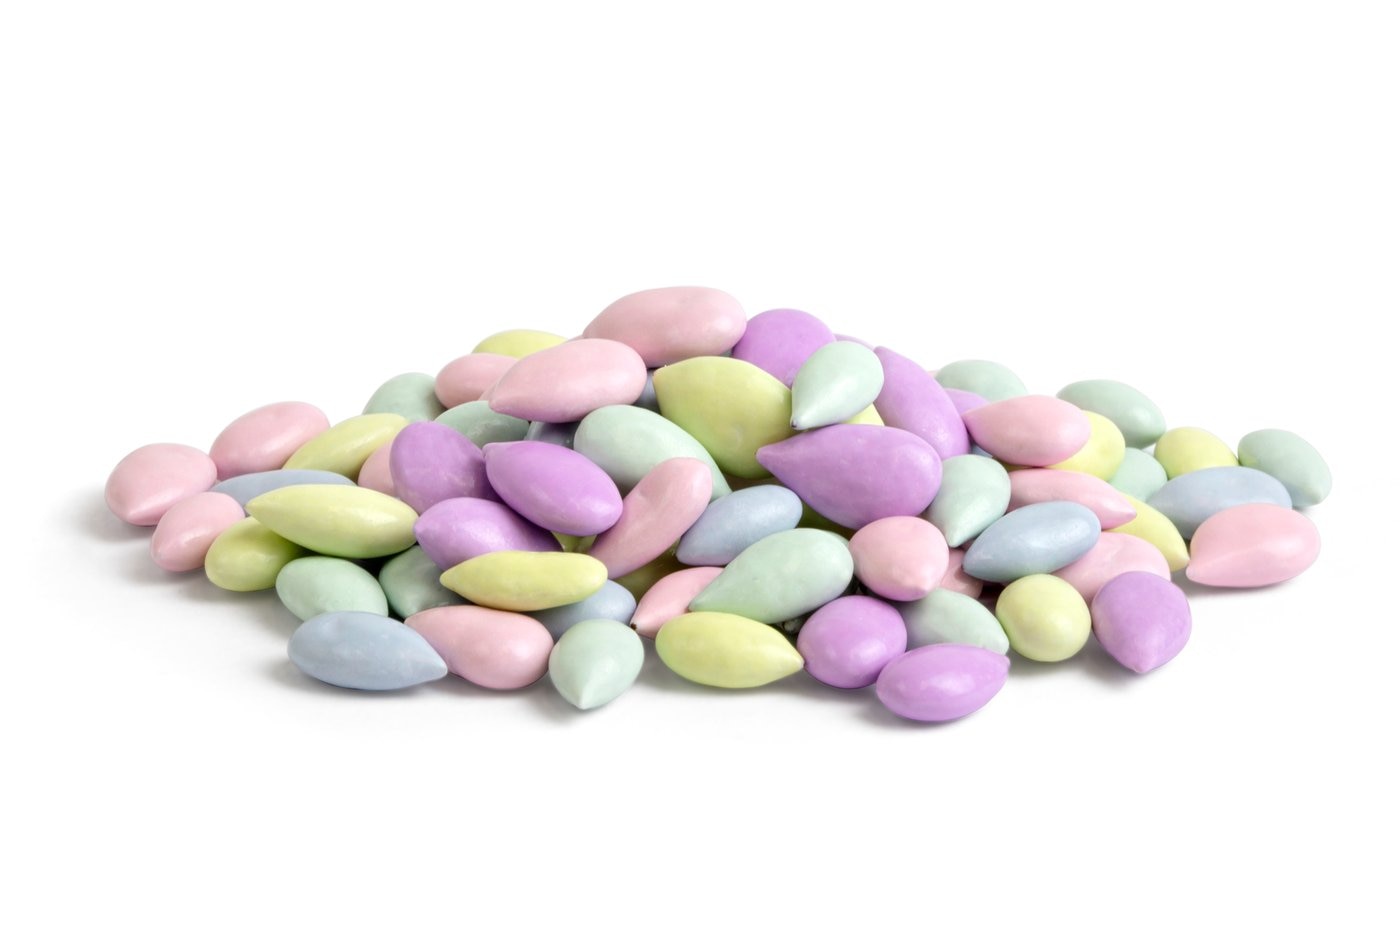 Chocolate Covered Sunflower Seeds (Pastel Mix) image zoom